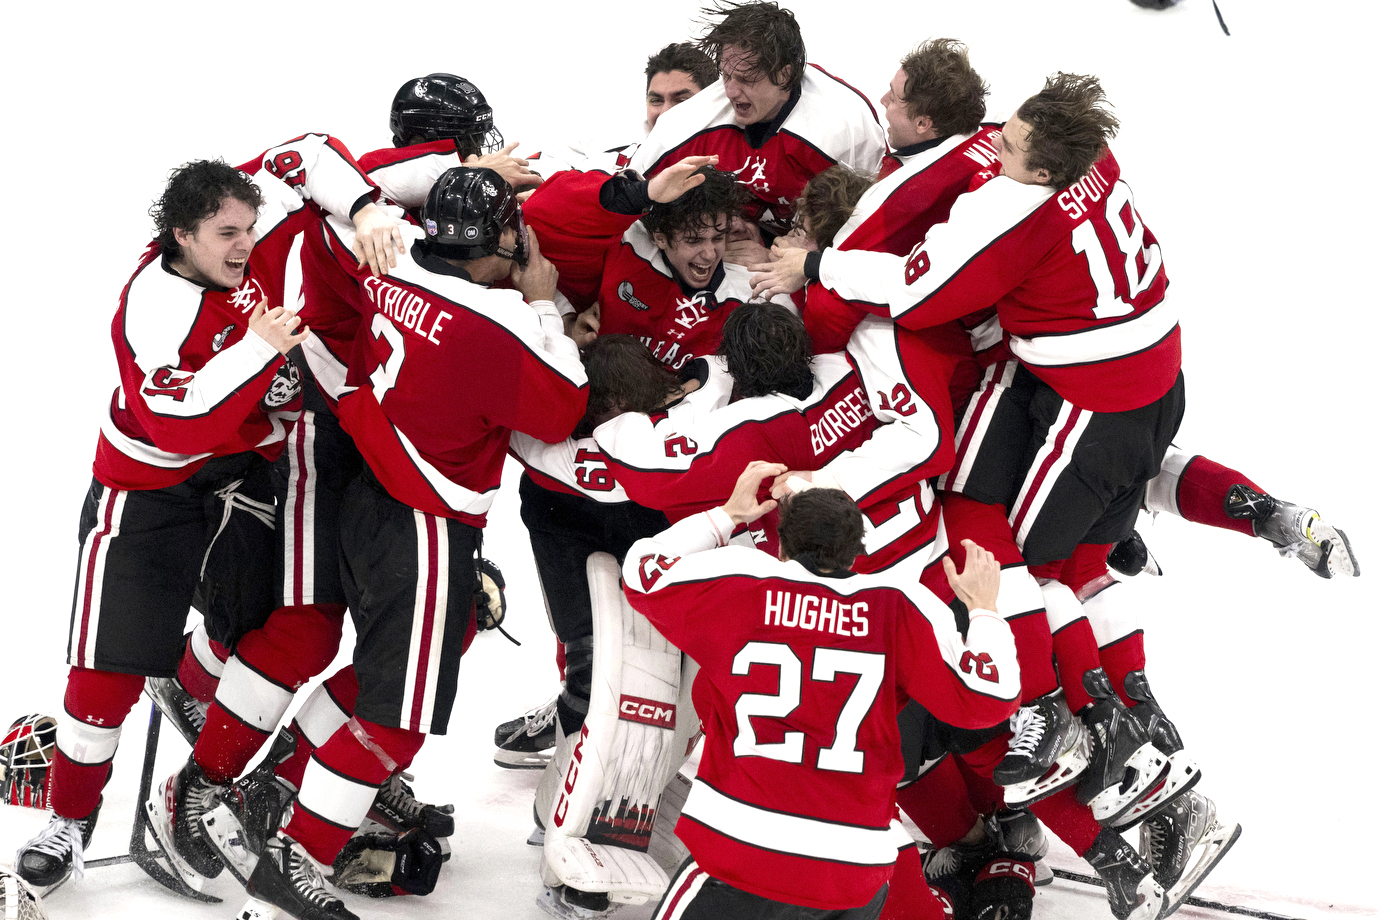 northeastern mens hockey team jumps on each other in celebration of winning the beanpot final